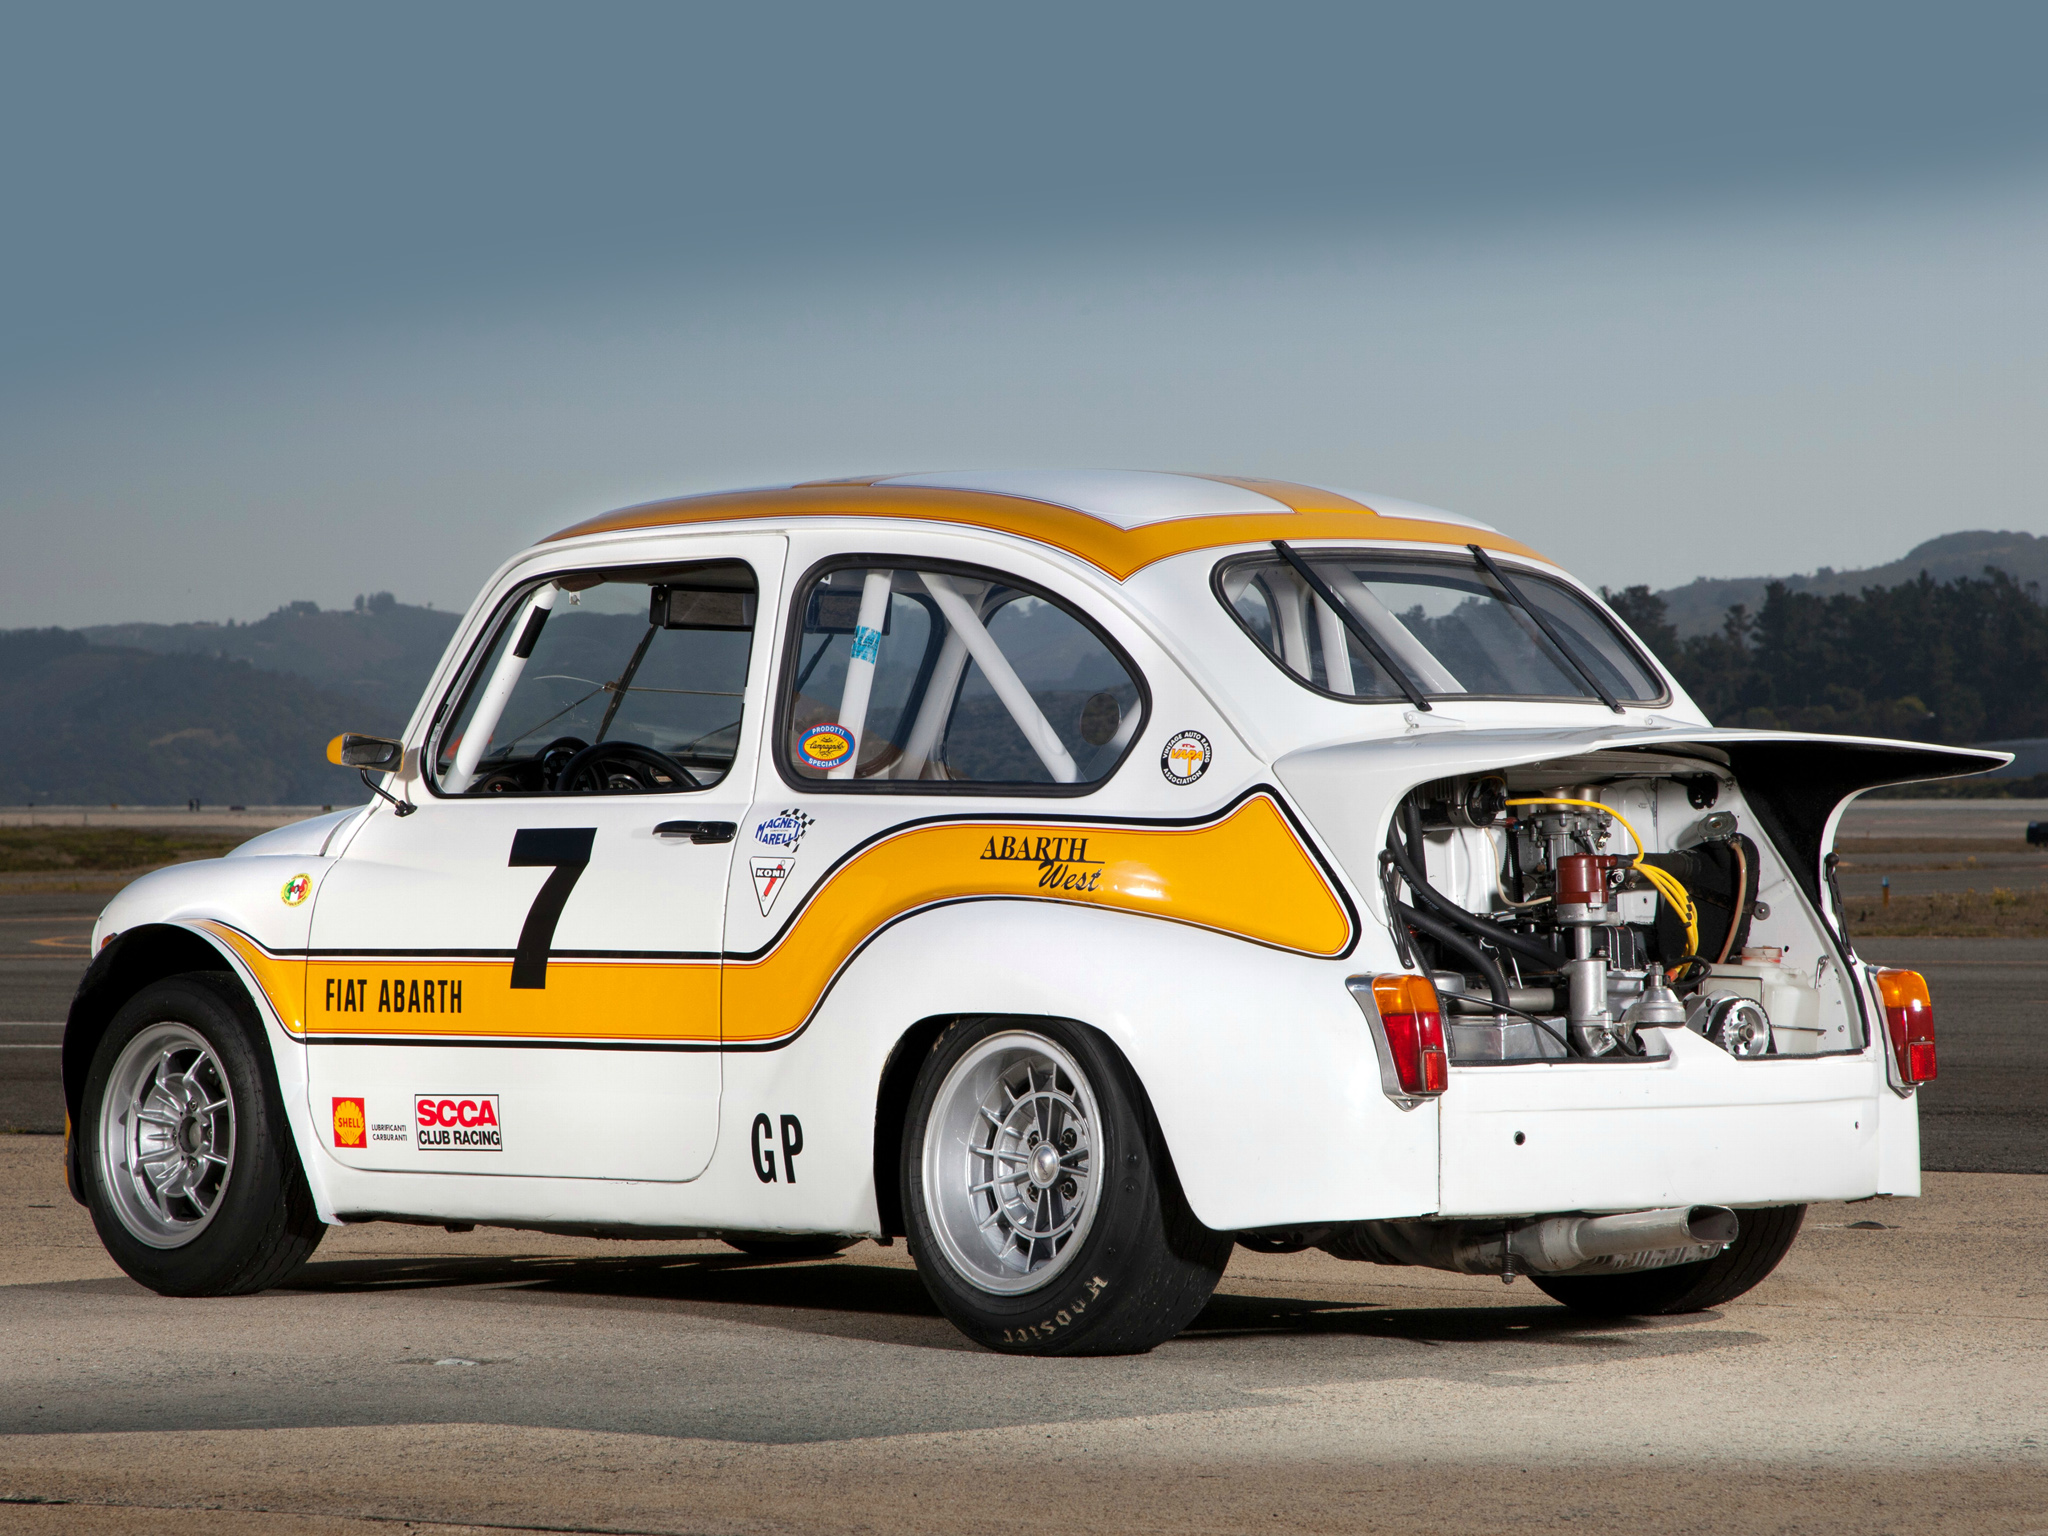 1970, Abarth, Fiat, 1000, Tcr, Group 2, Race, Racing, Engine Wallpaper